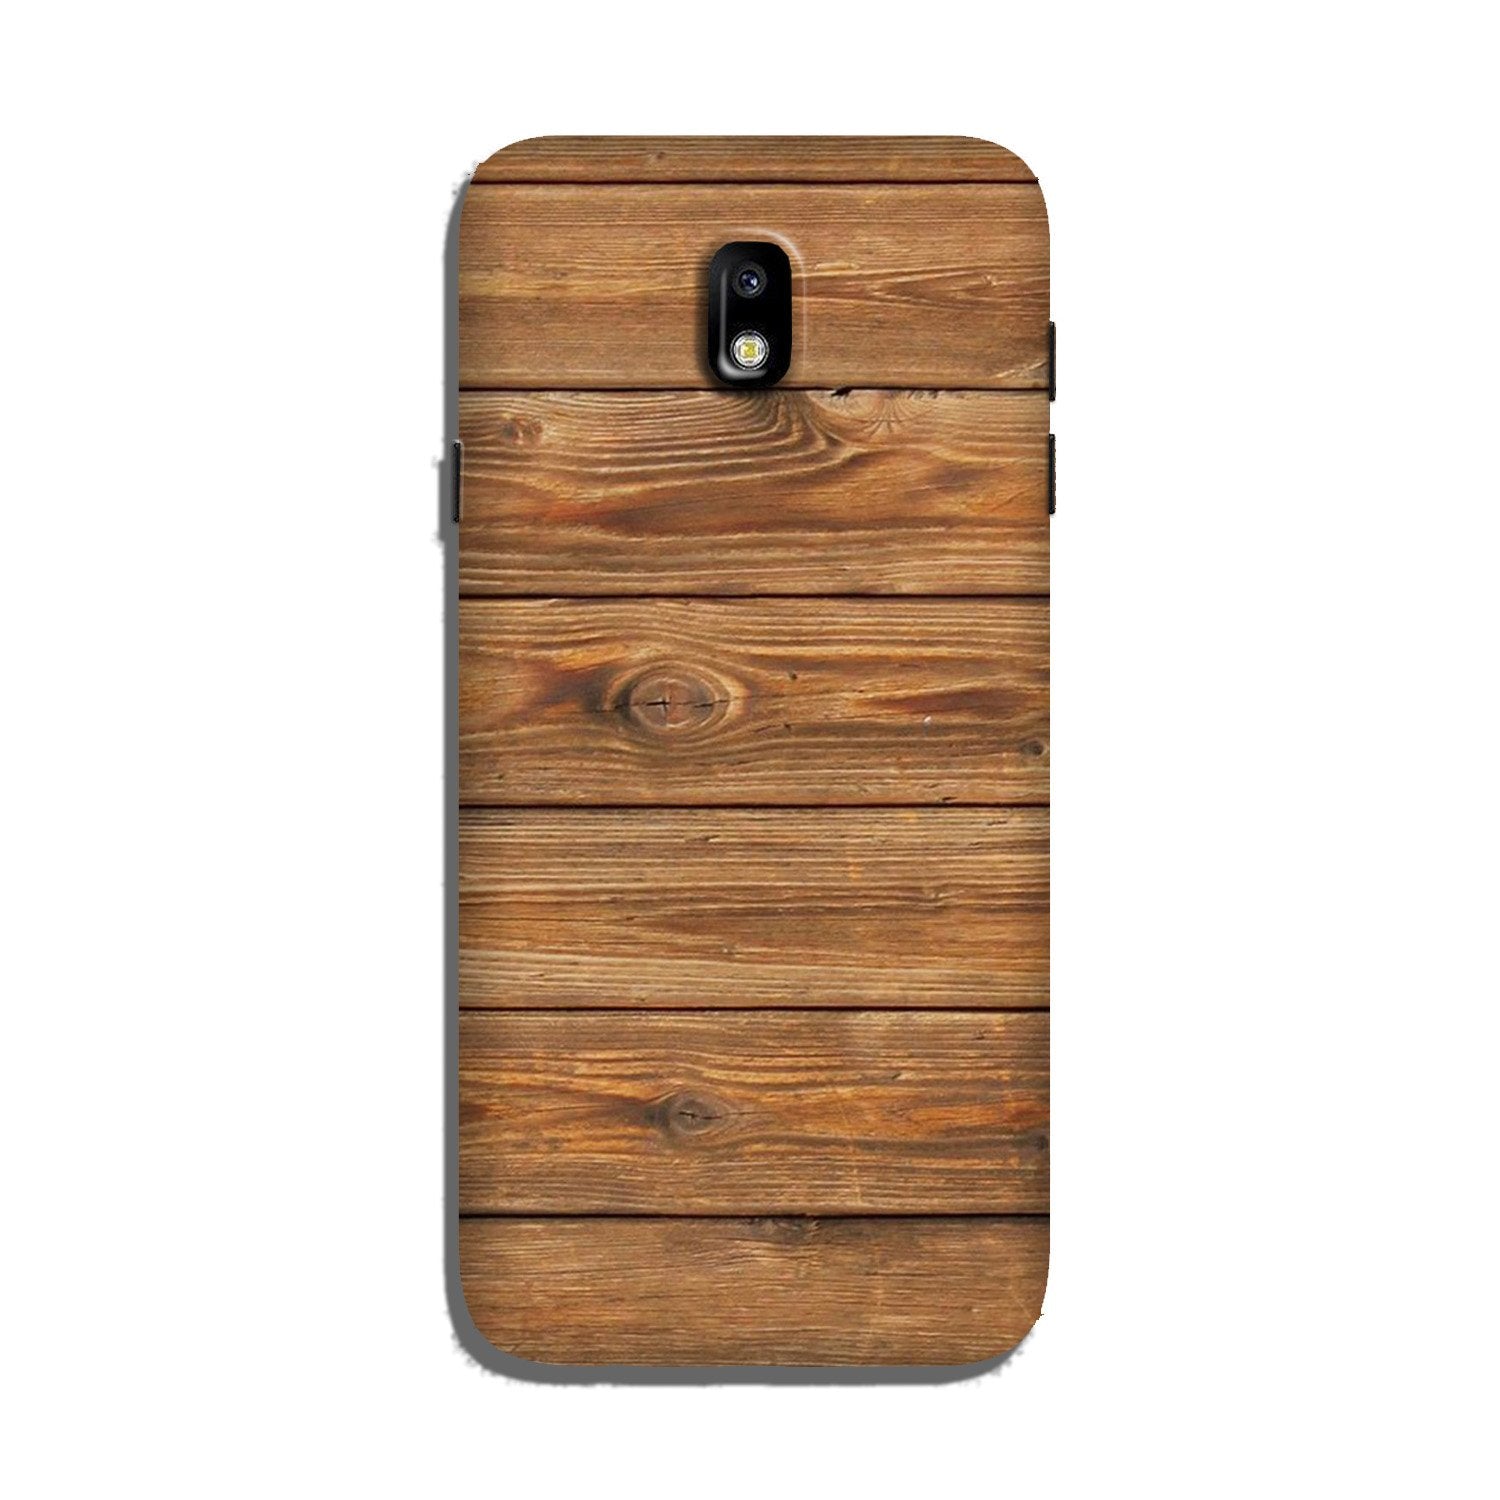 Wooden Look Case for Galaxy J7 Pro  (Design - 113)